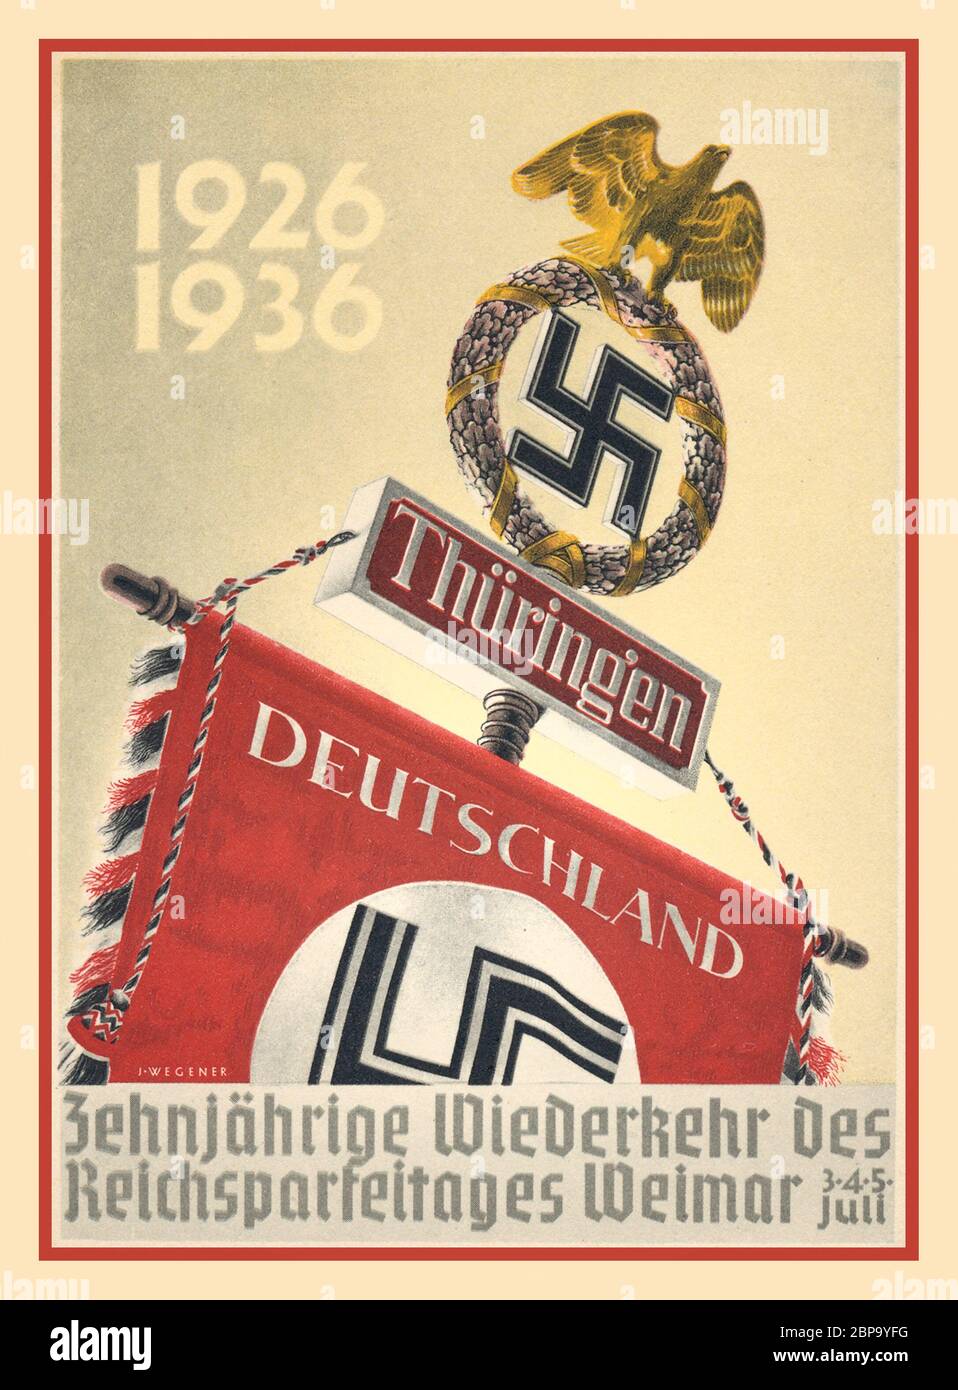 NSDAP Nazi Propaganda poster 'Anniversary of the Weimar Reich Savings Day' 1926-1936 featuring banner from the German state of Thüringen, with Nazi Swastika and gold coloured eagle July 3,4,5,1936 Stock Photo